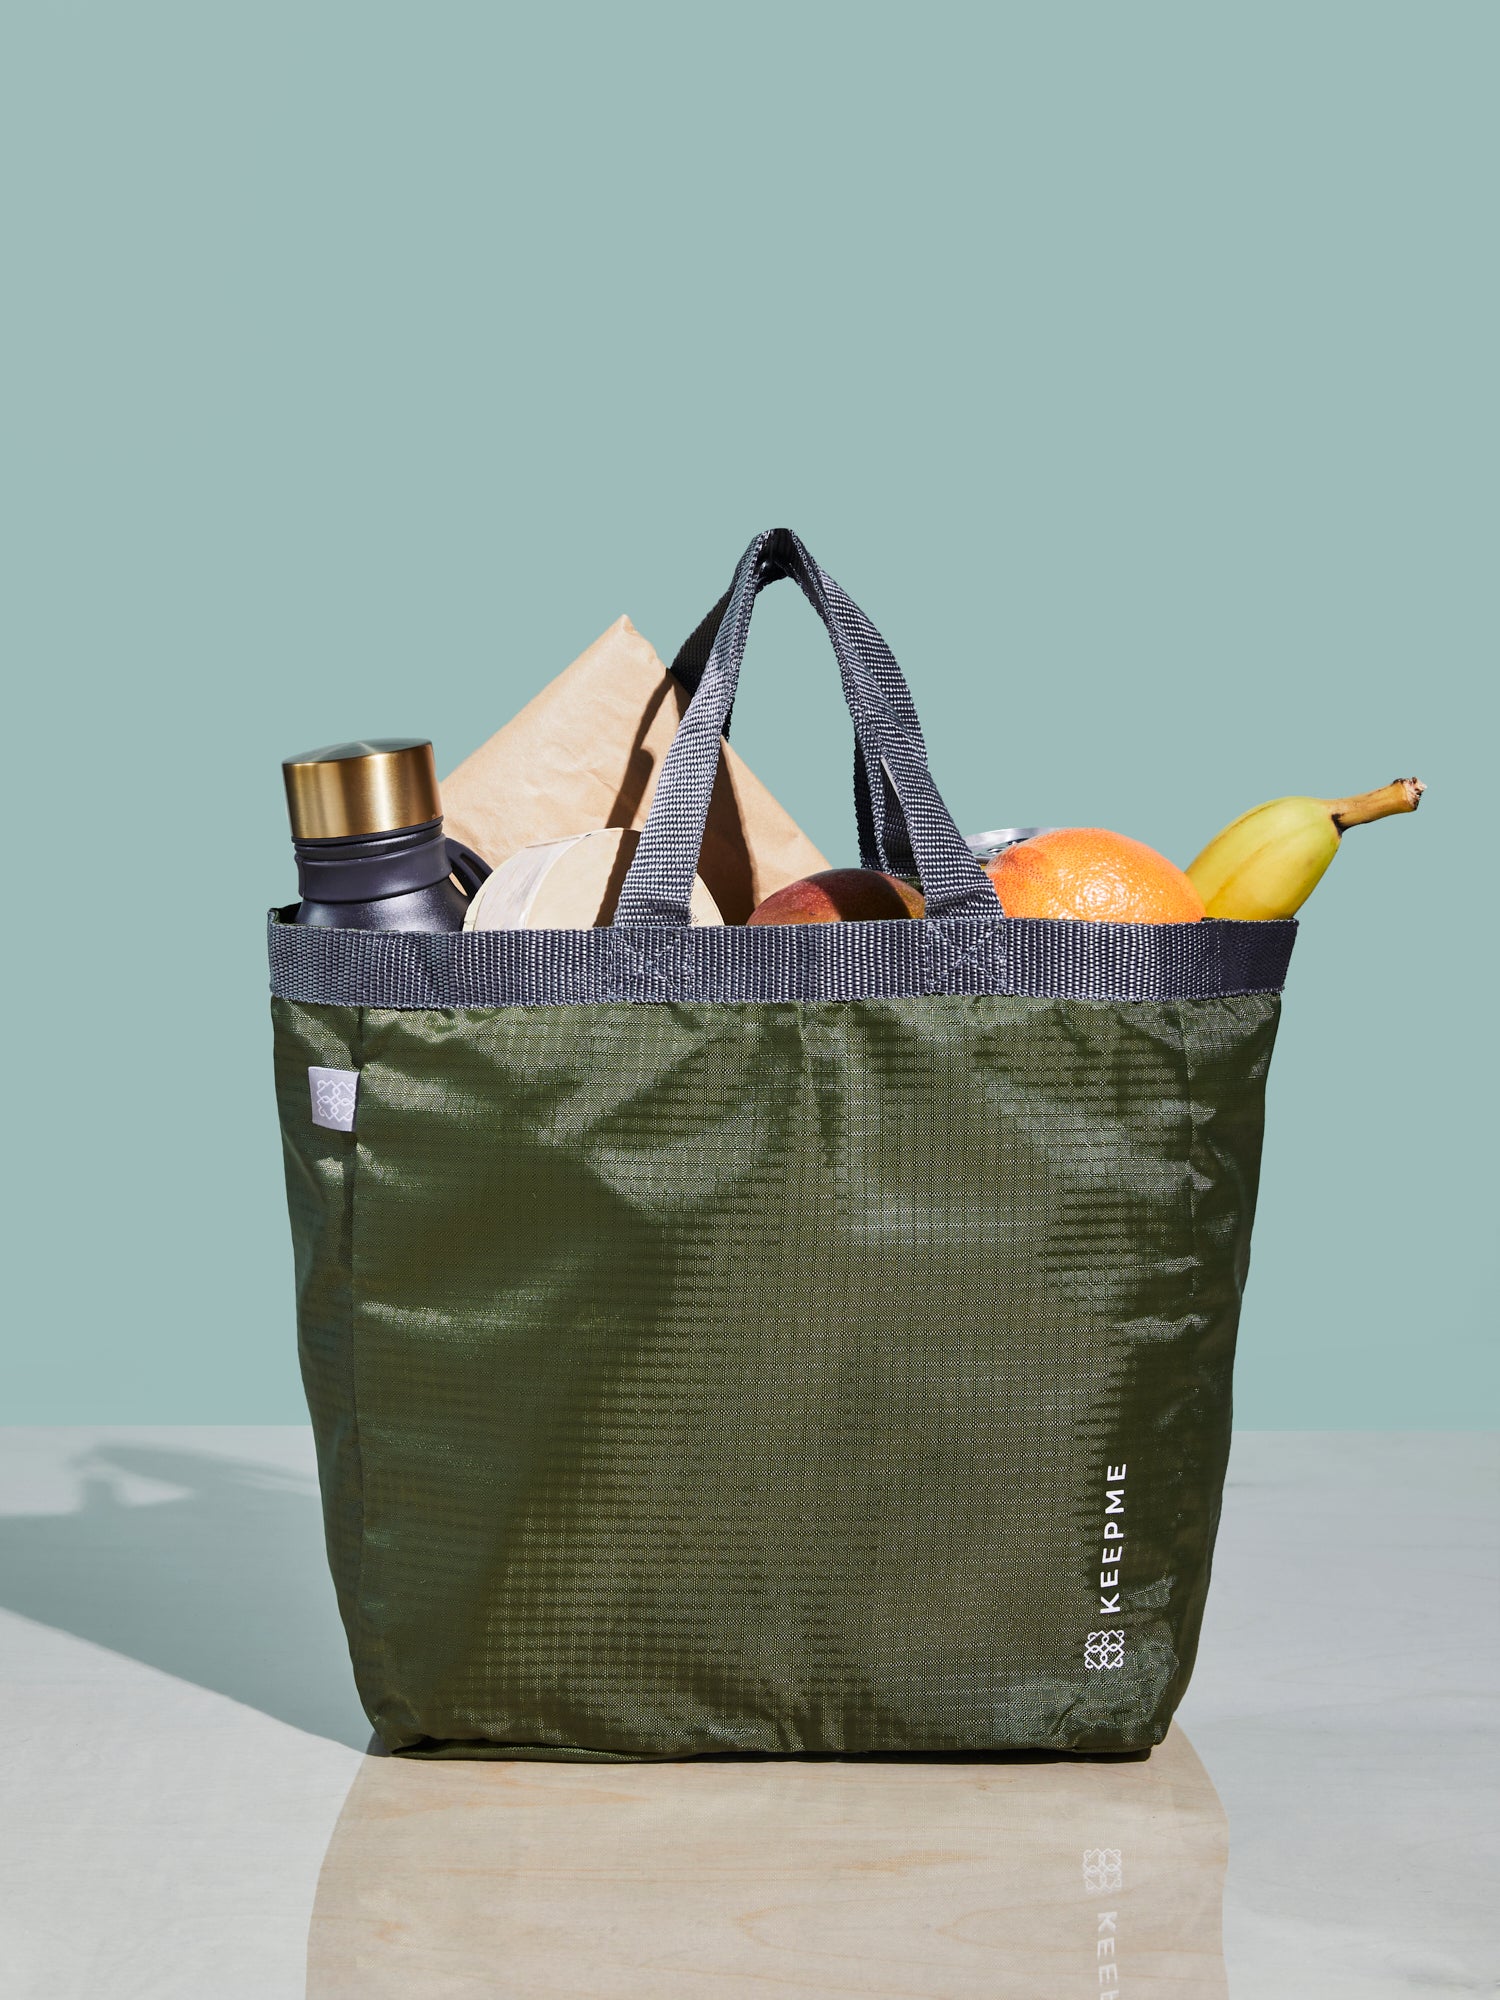 Tote Bags: Stylish Totes to Carry Everything You Need